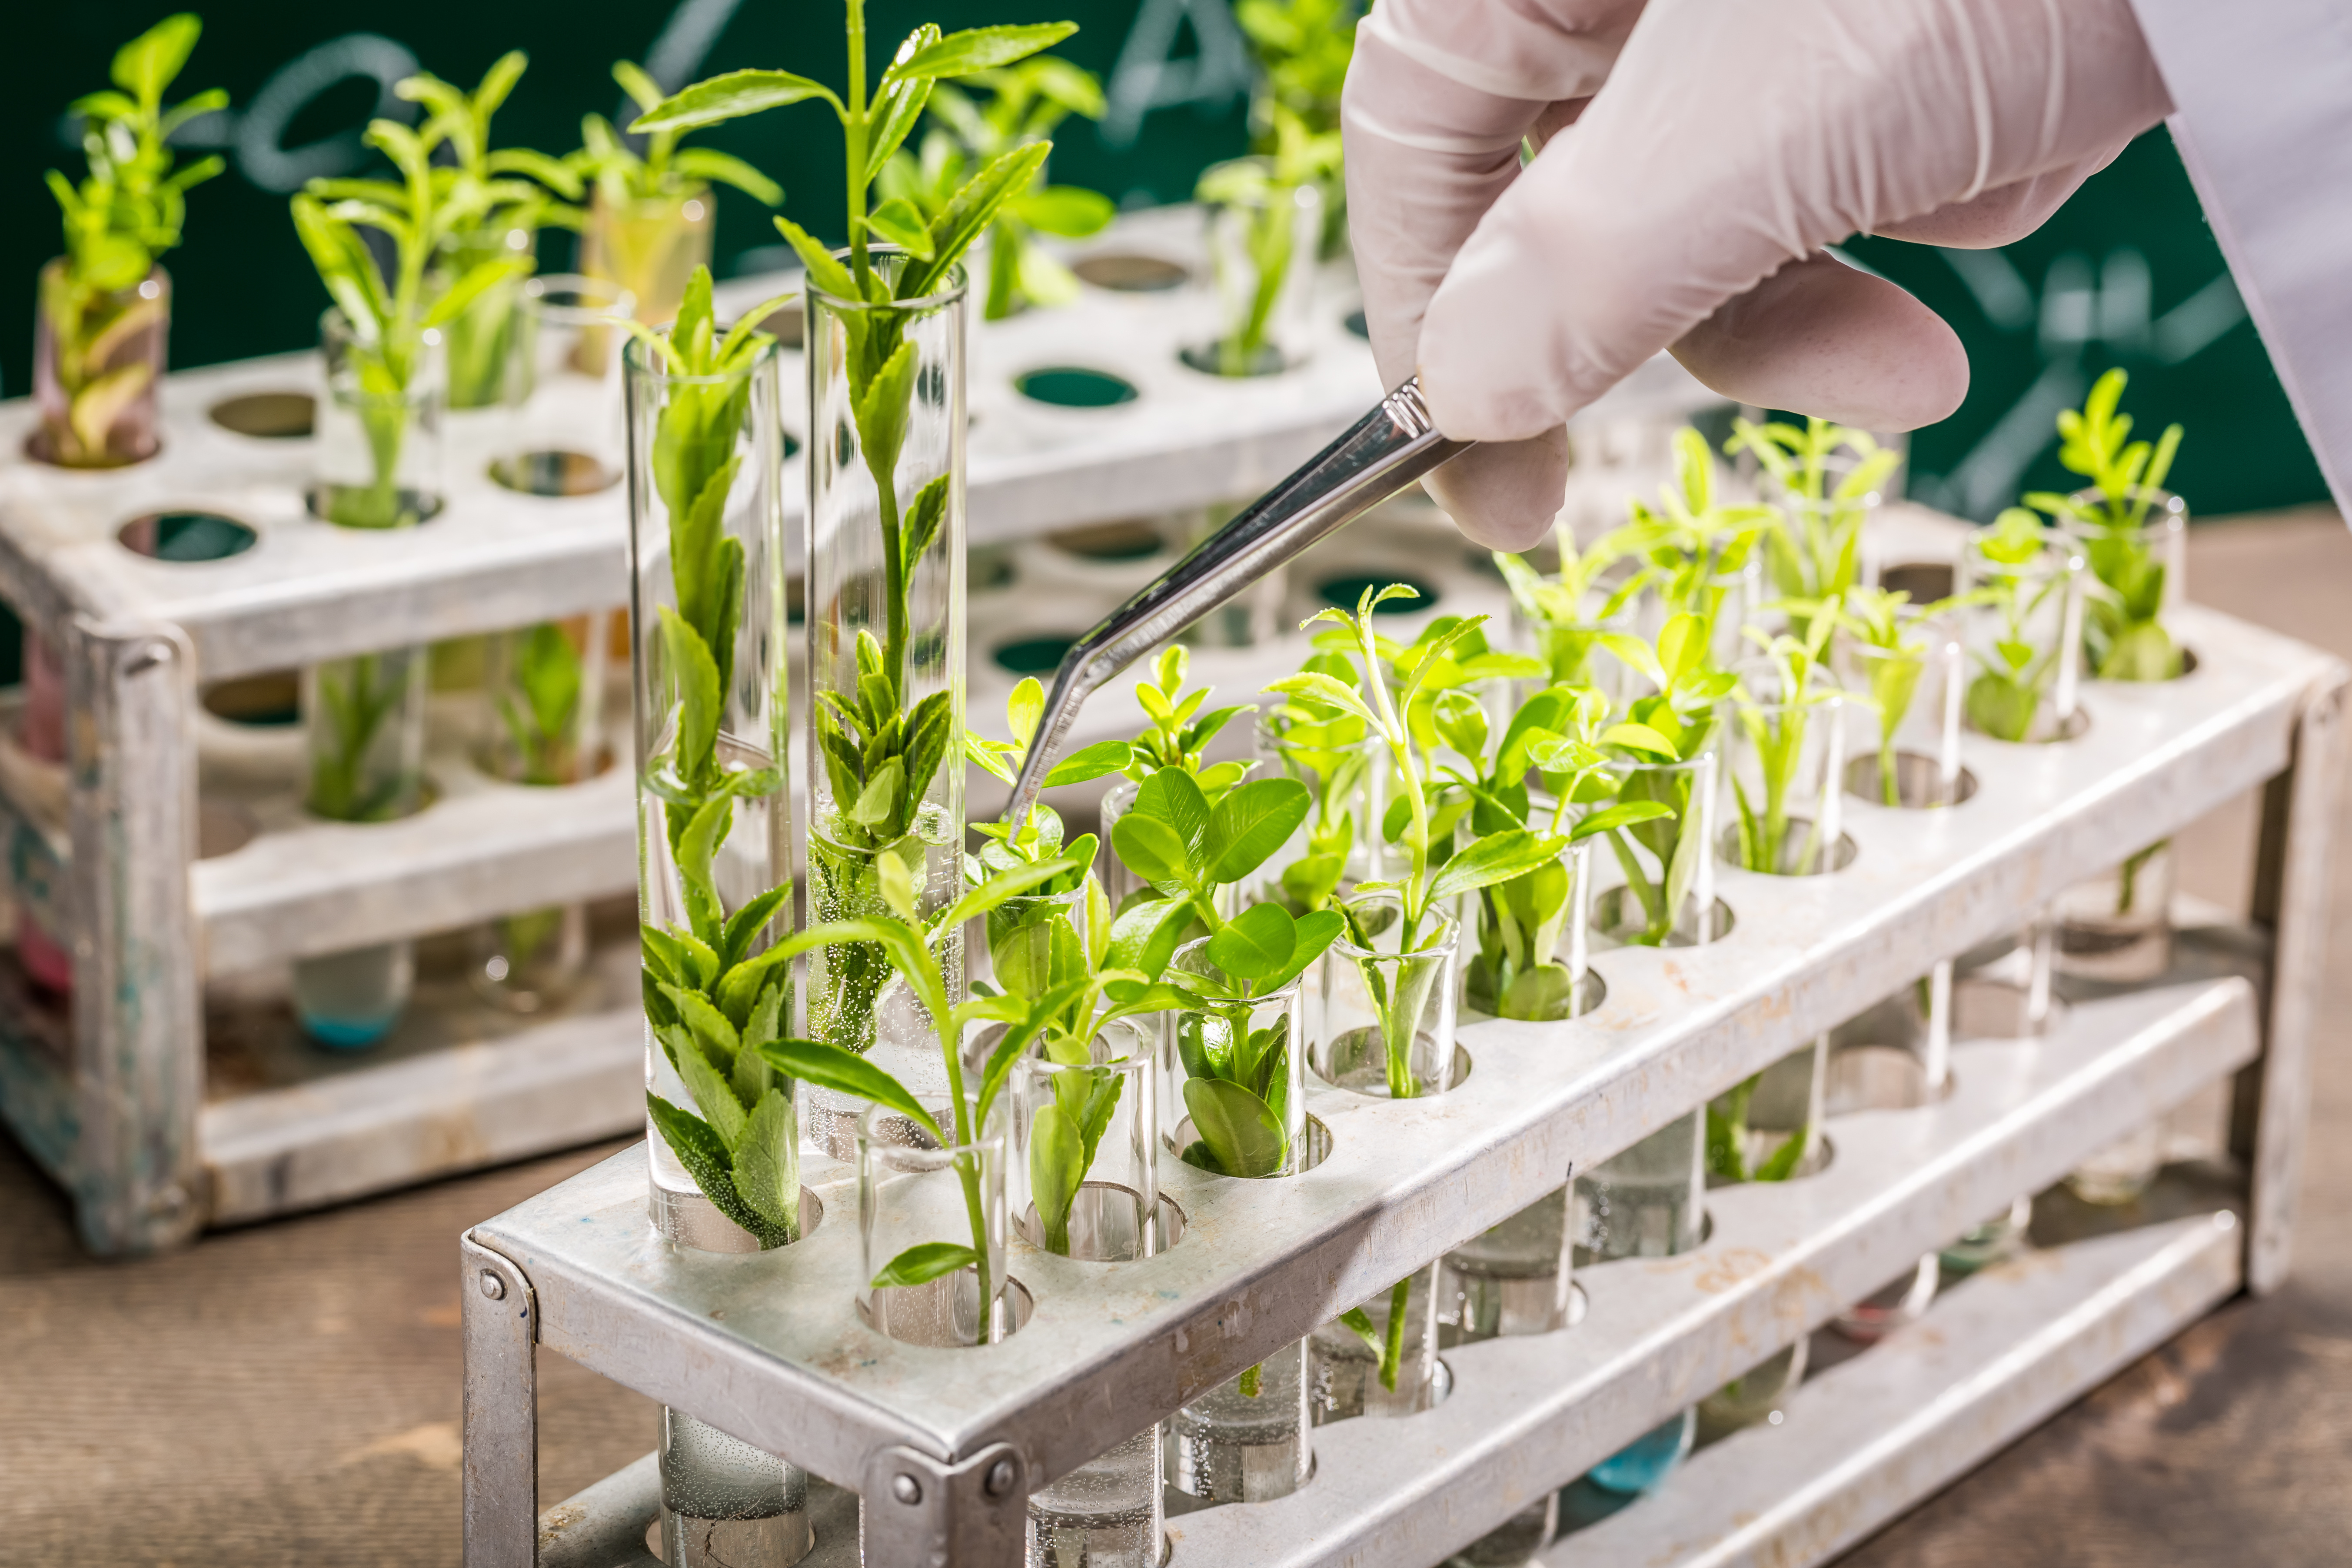 The development of new technologies also means that sustainability will increasingly come from the laboratory in the future. (Image: Adobe Stock)